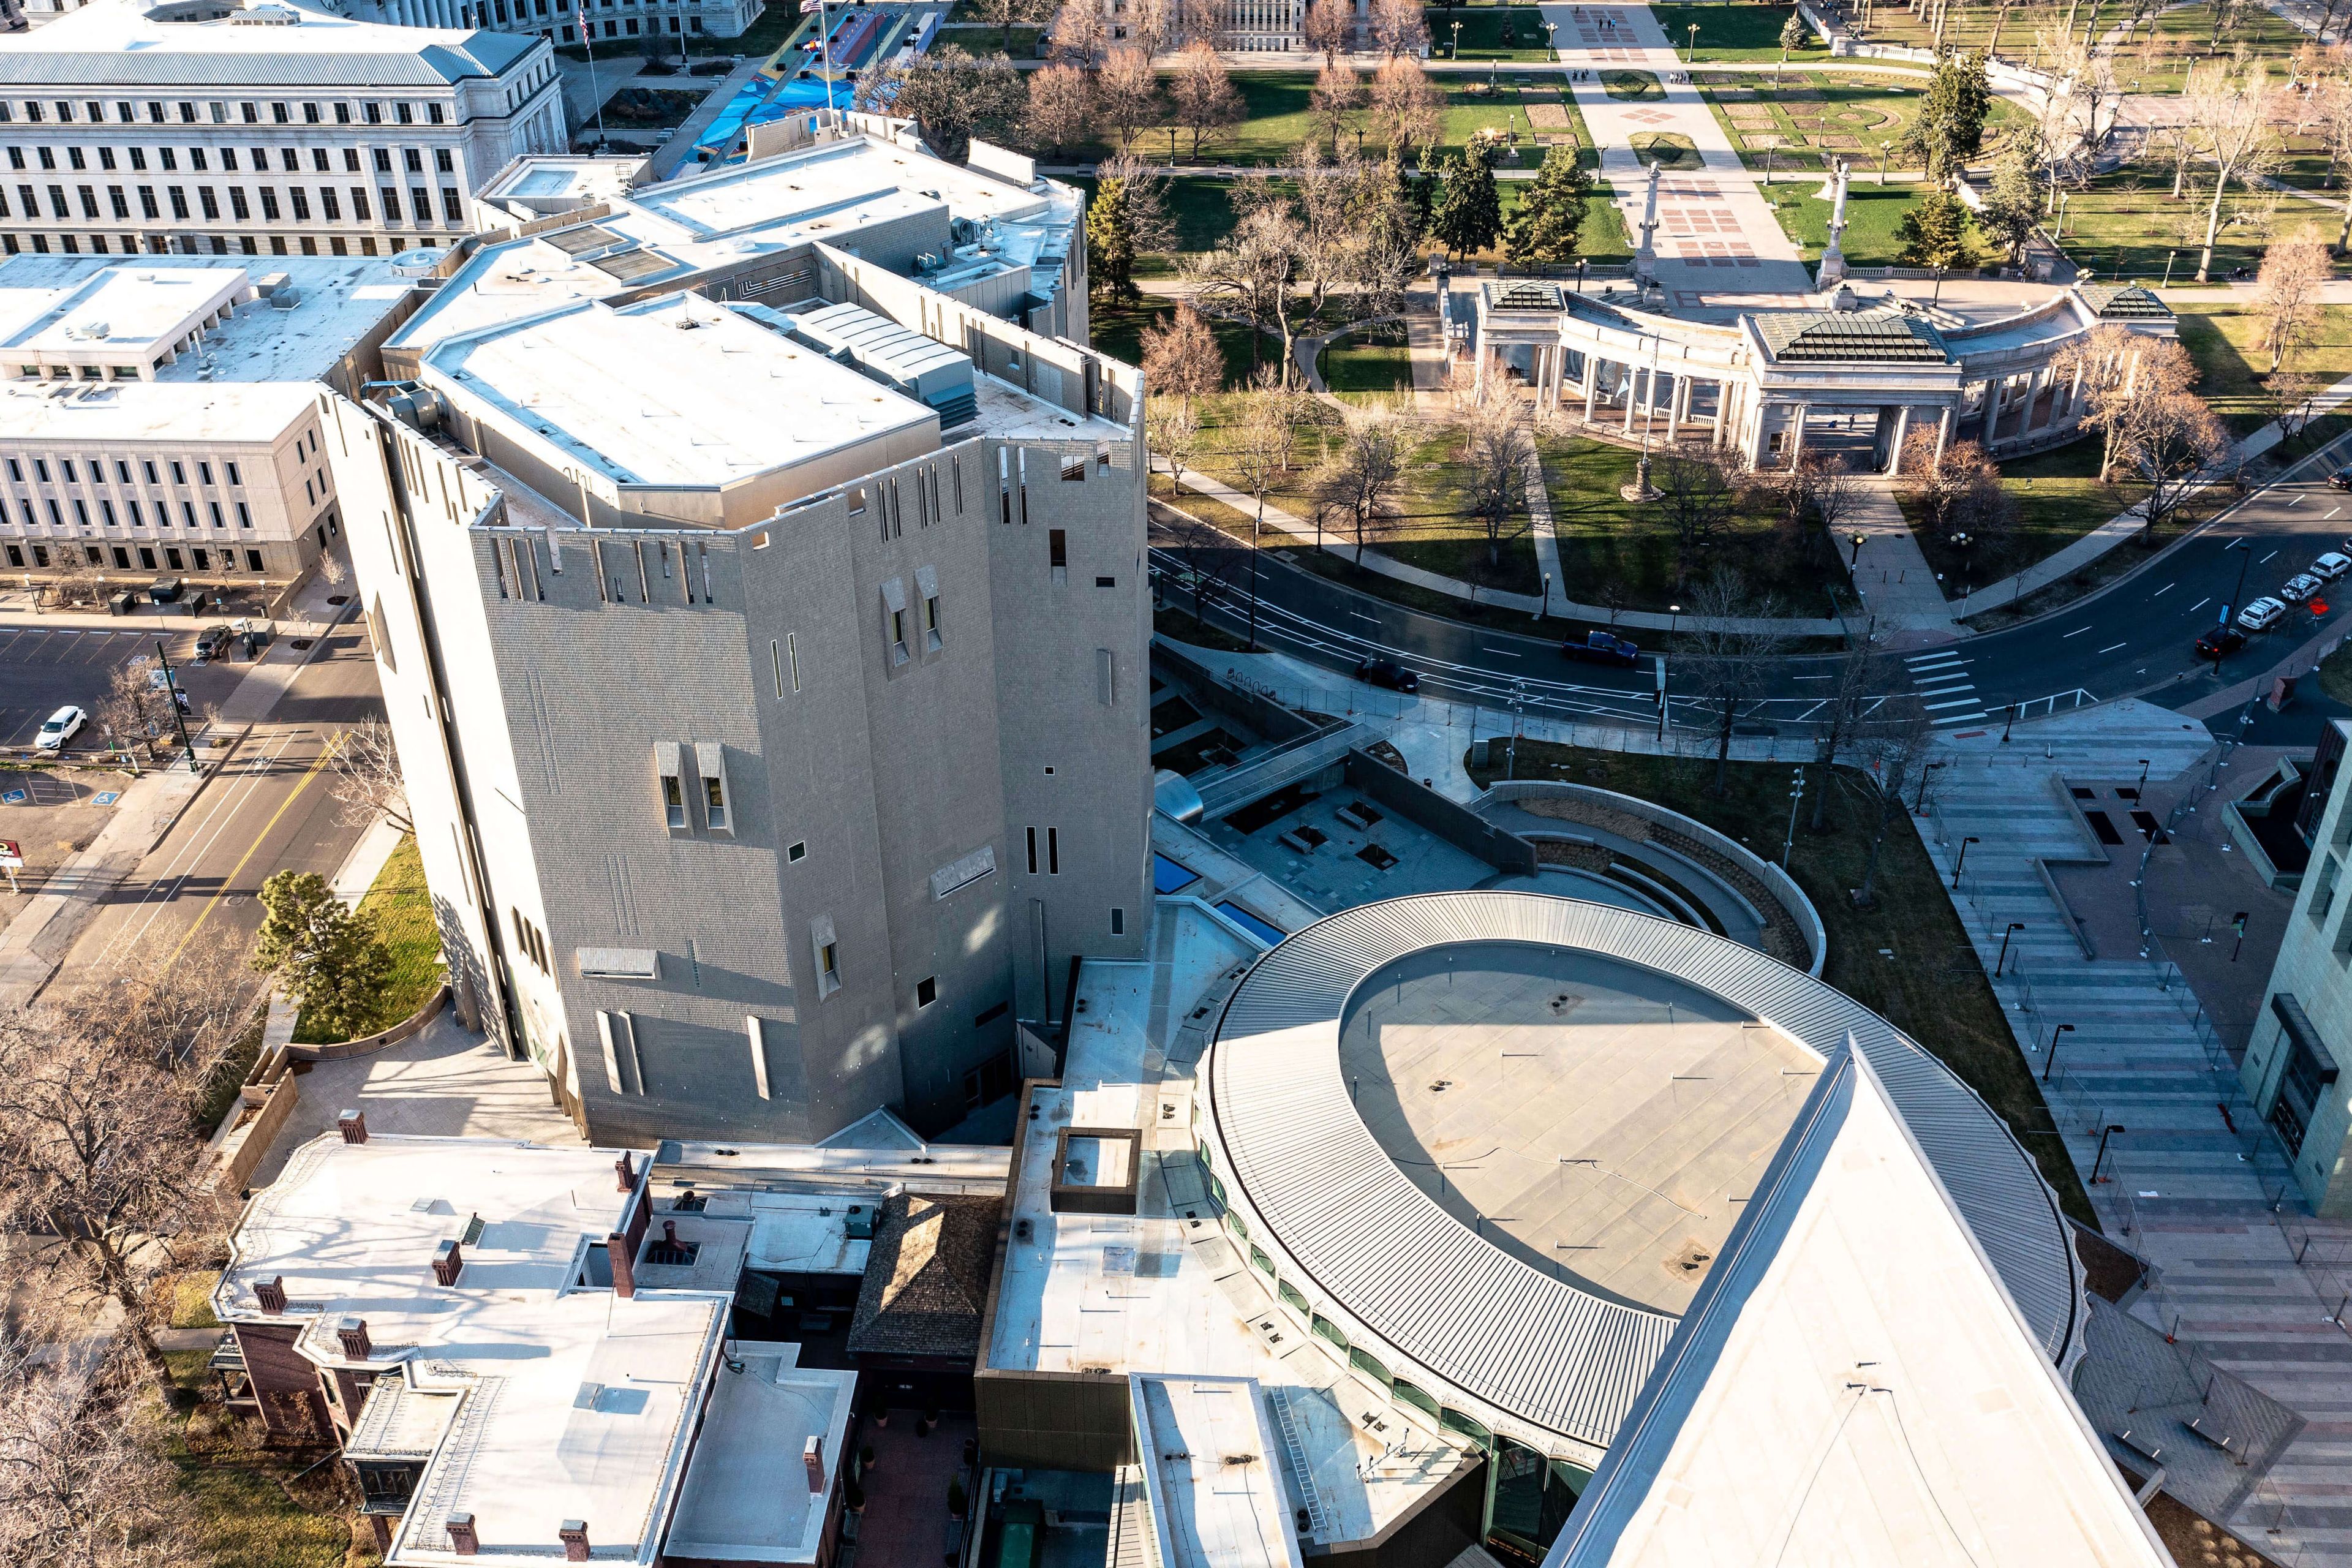 Aerial view of the Denver Art Museum showing a white Sarnafil membrane roof on multiple buildings. 